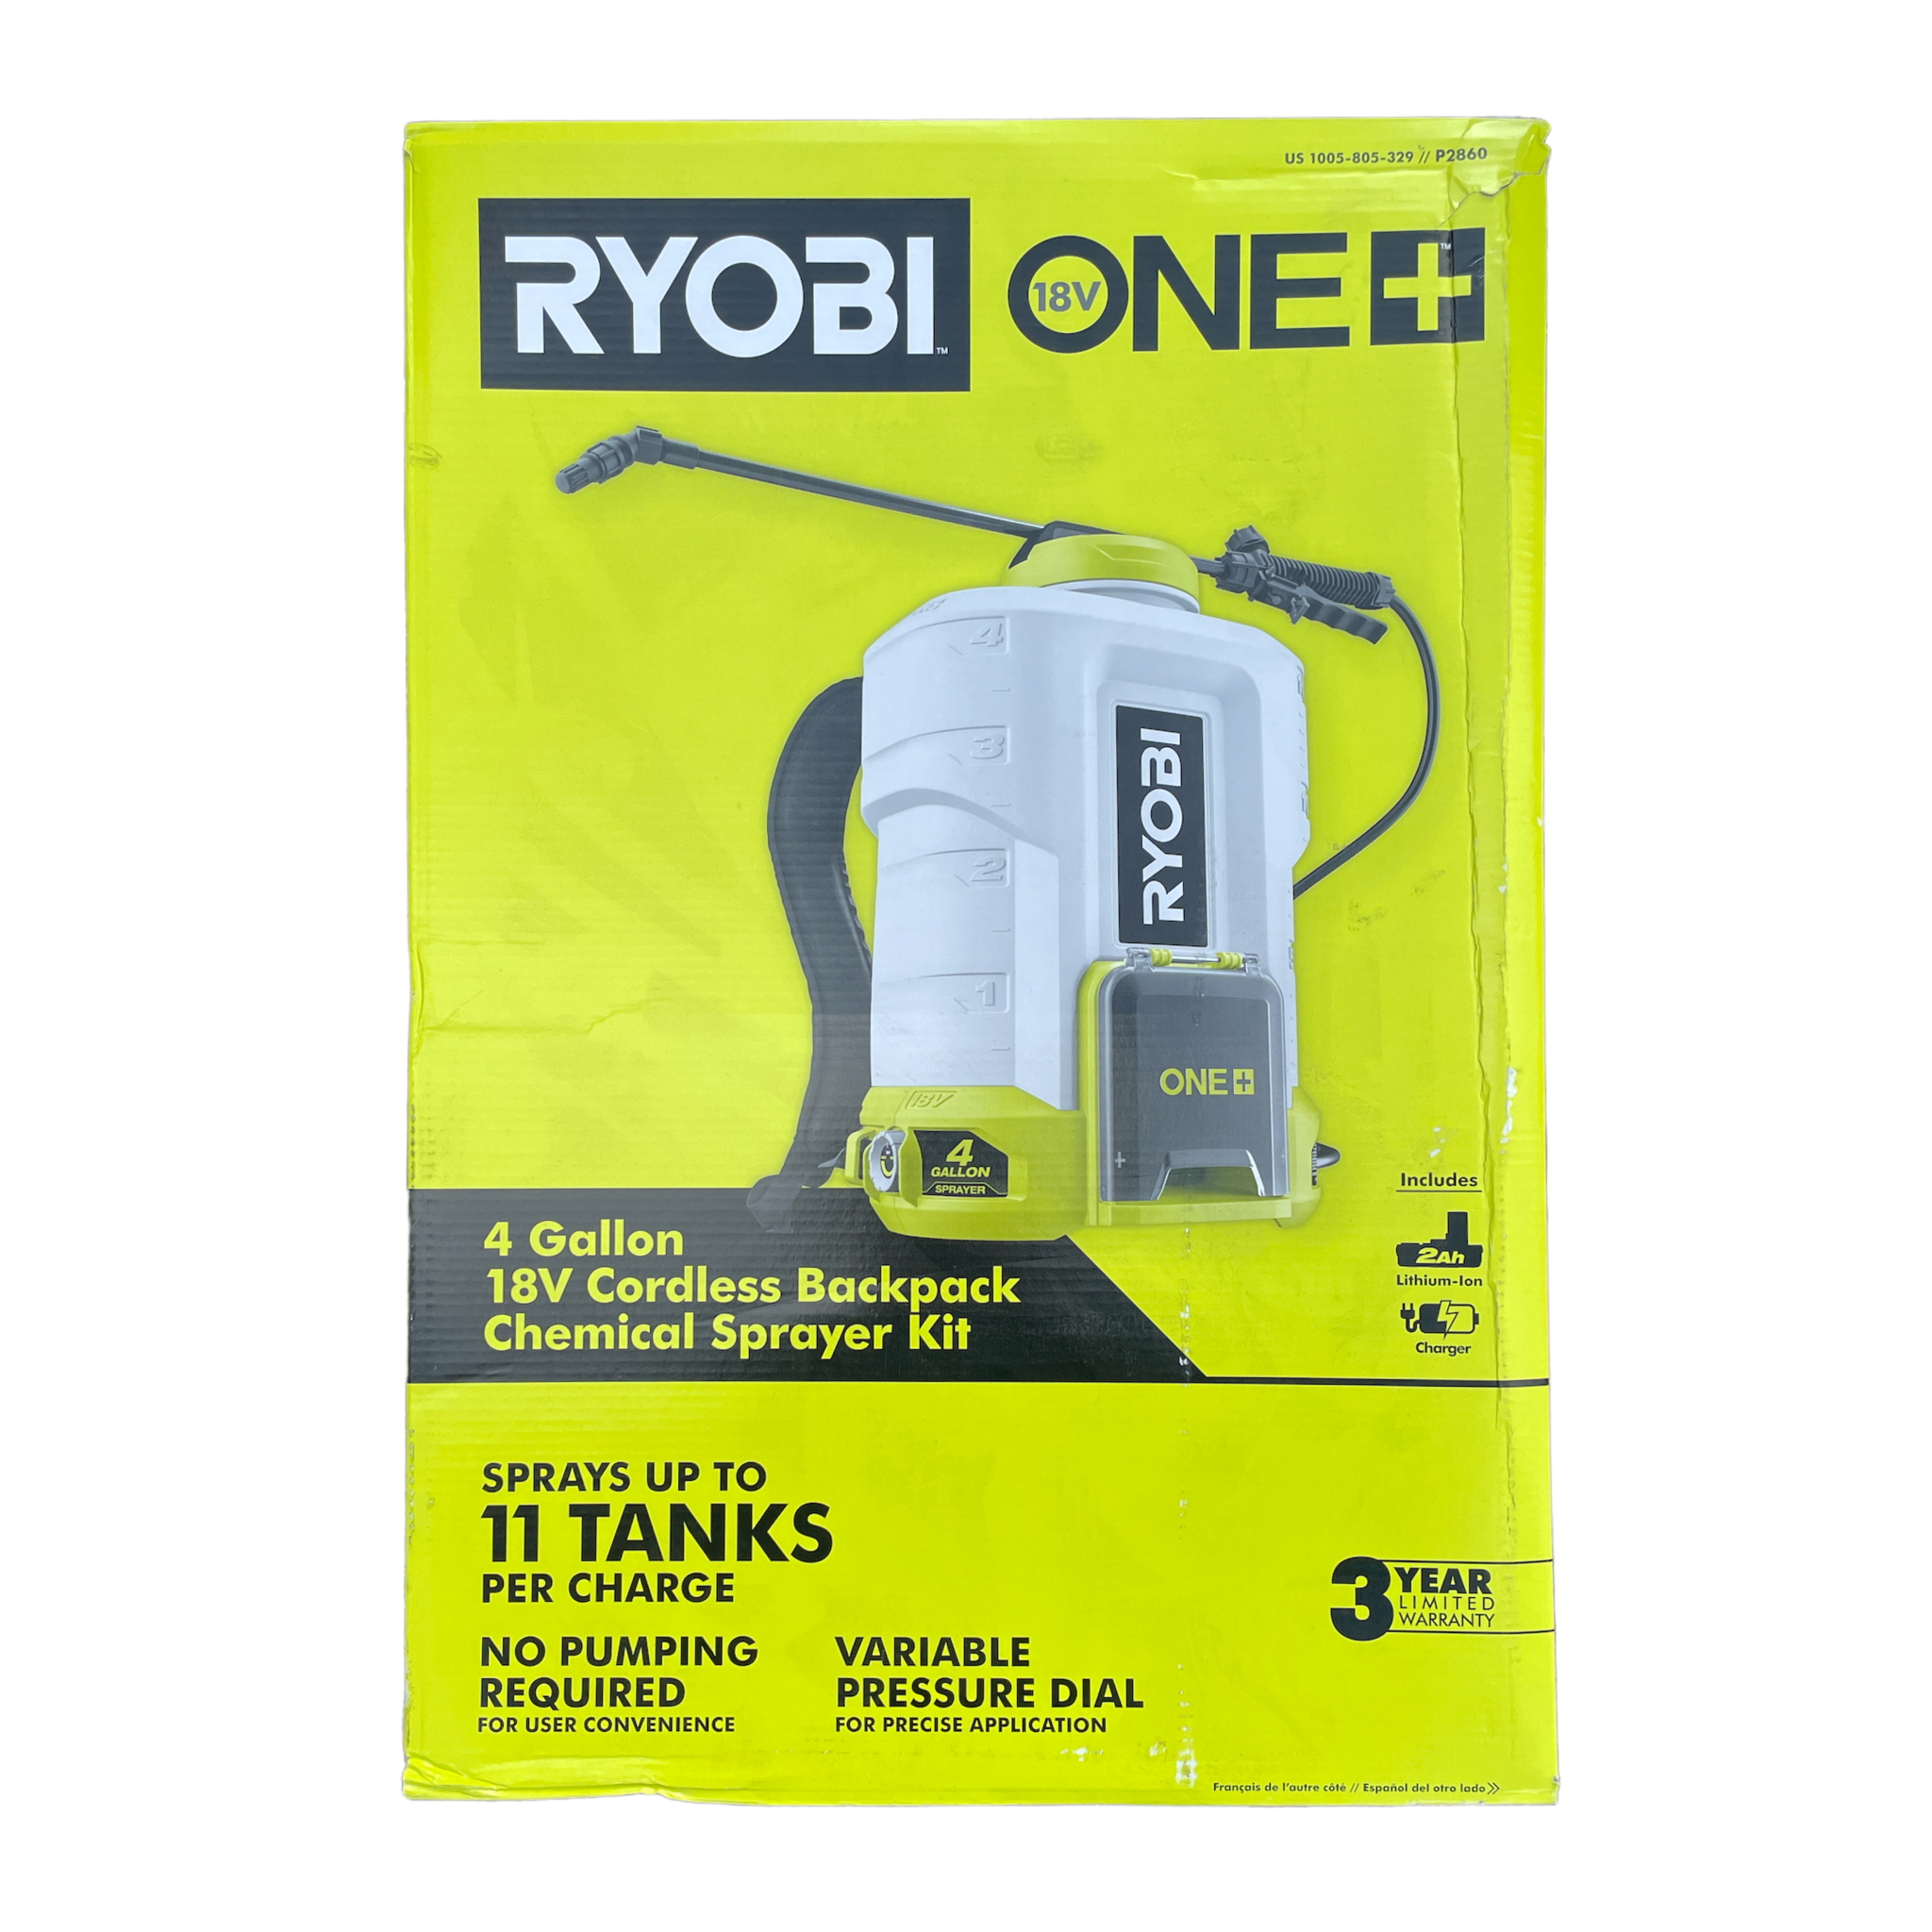 ONE+ 18-Volt Lithium-Ion Cordless Gal. Backpack Chemical Sprayer Kit –  Ryobi Deal Finders